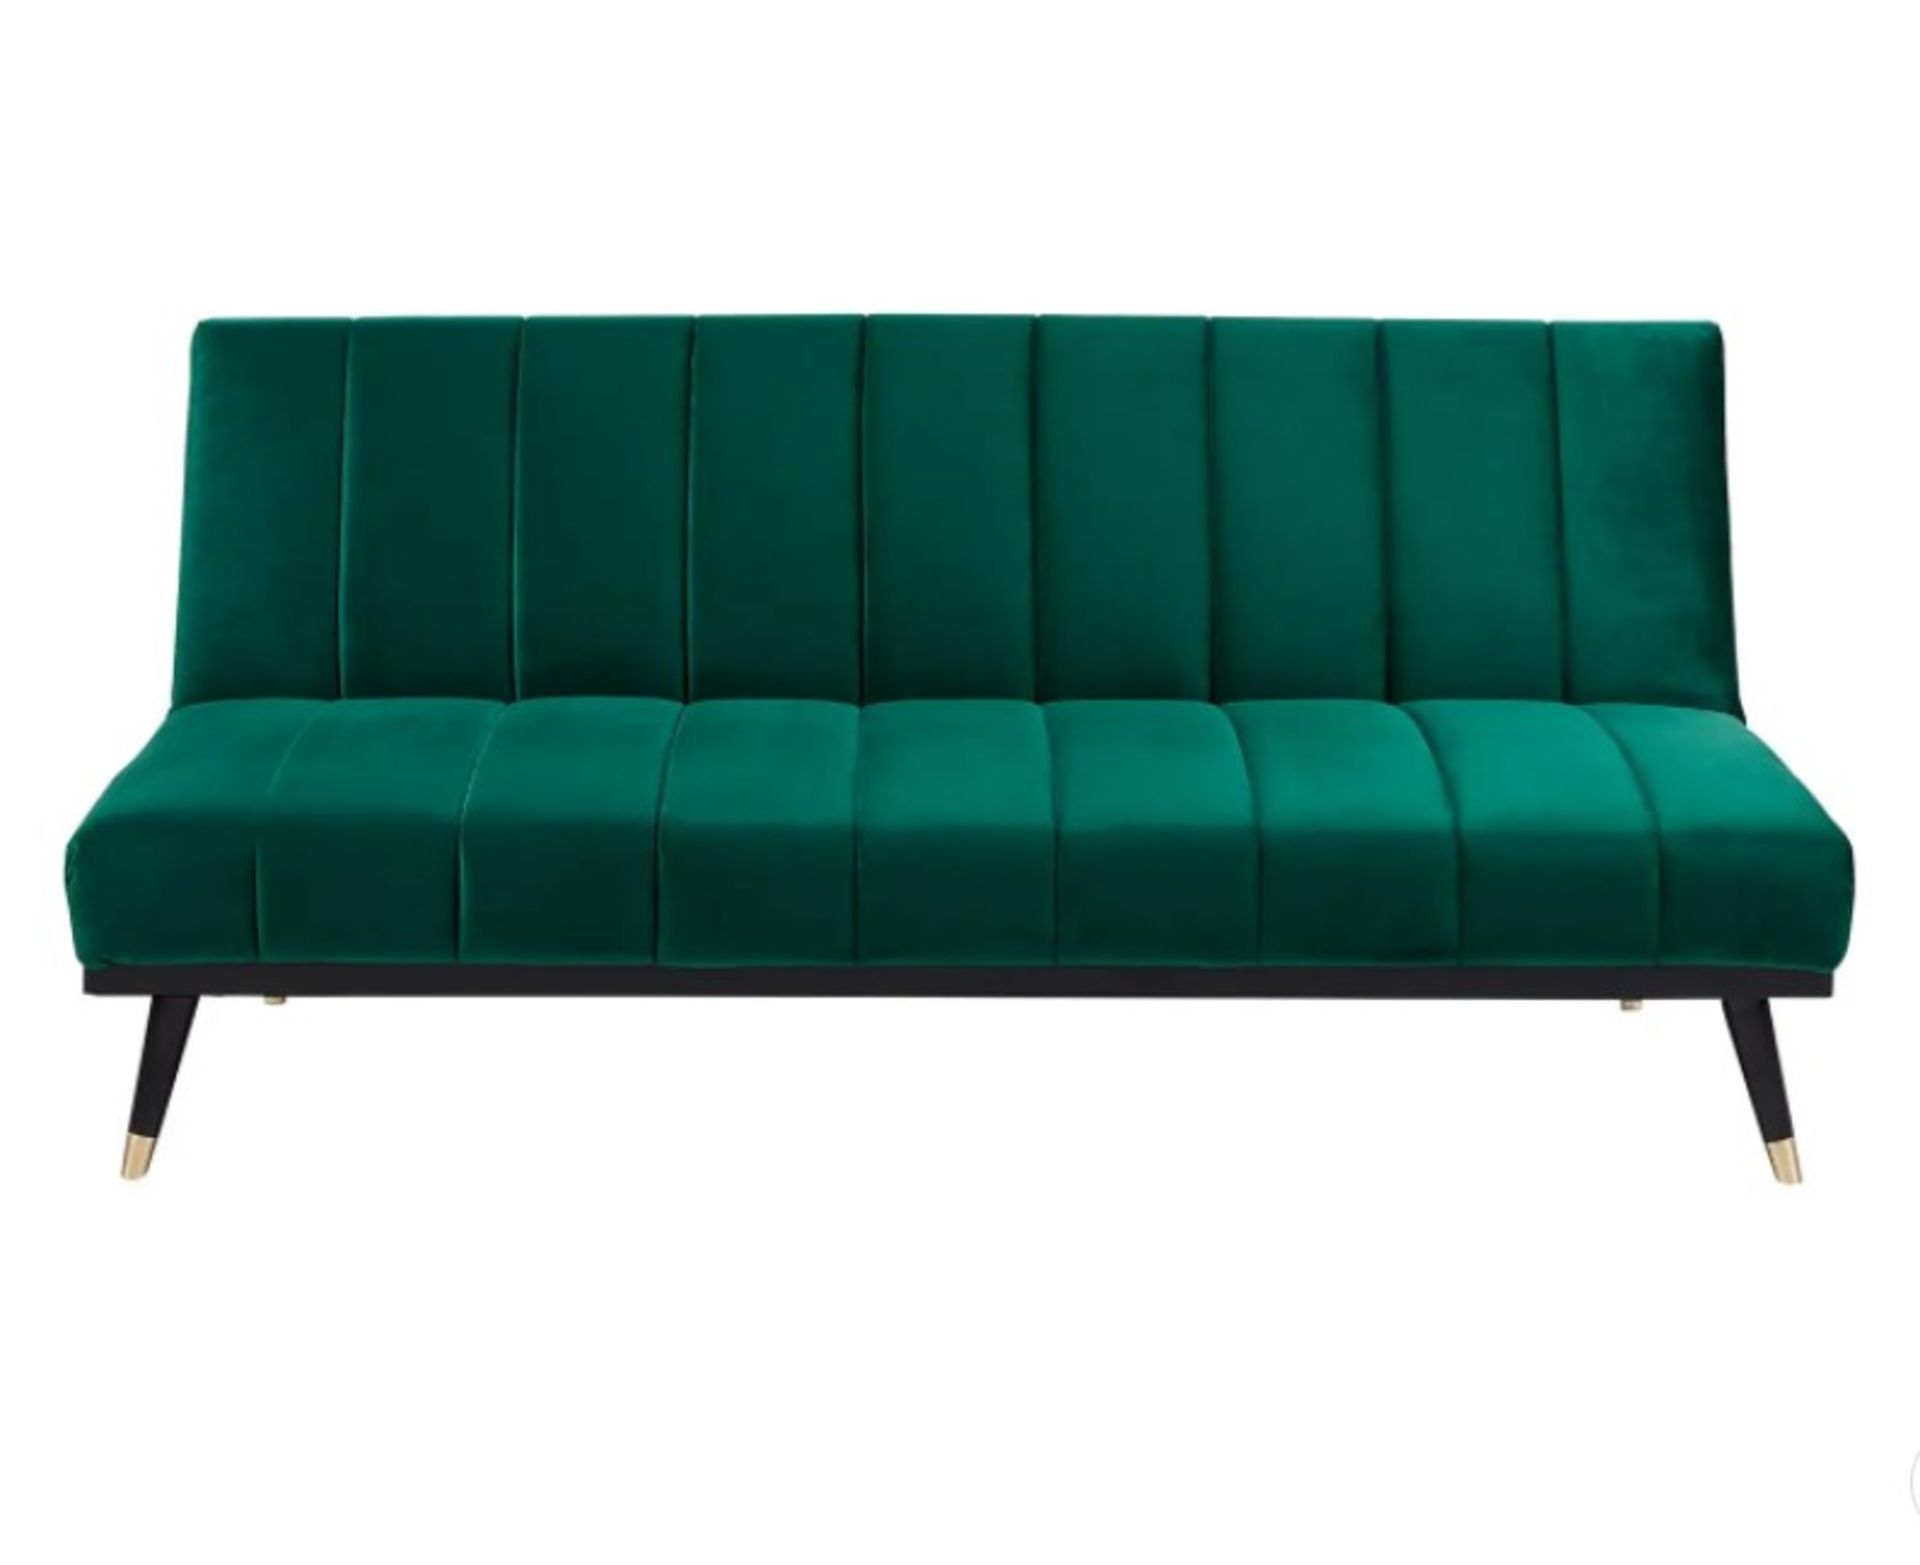 1x Sindy Sofa Bed Luxe Emerald Green (With Legs) RRP £250. Sofa : (H)82 x (W)181 x (D)83cm. Sofa - Image 3 of 7